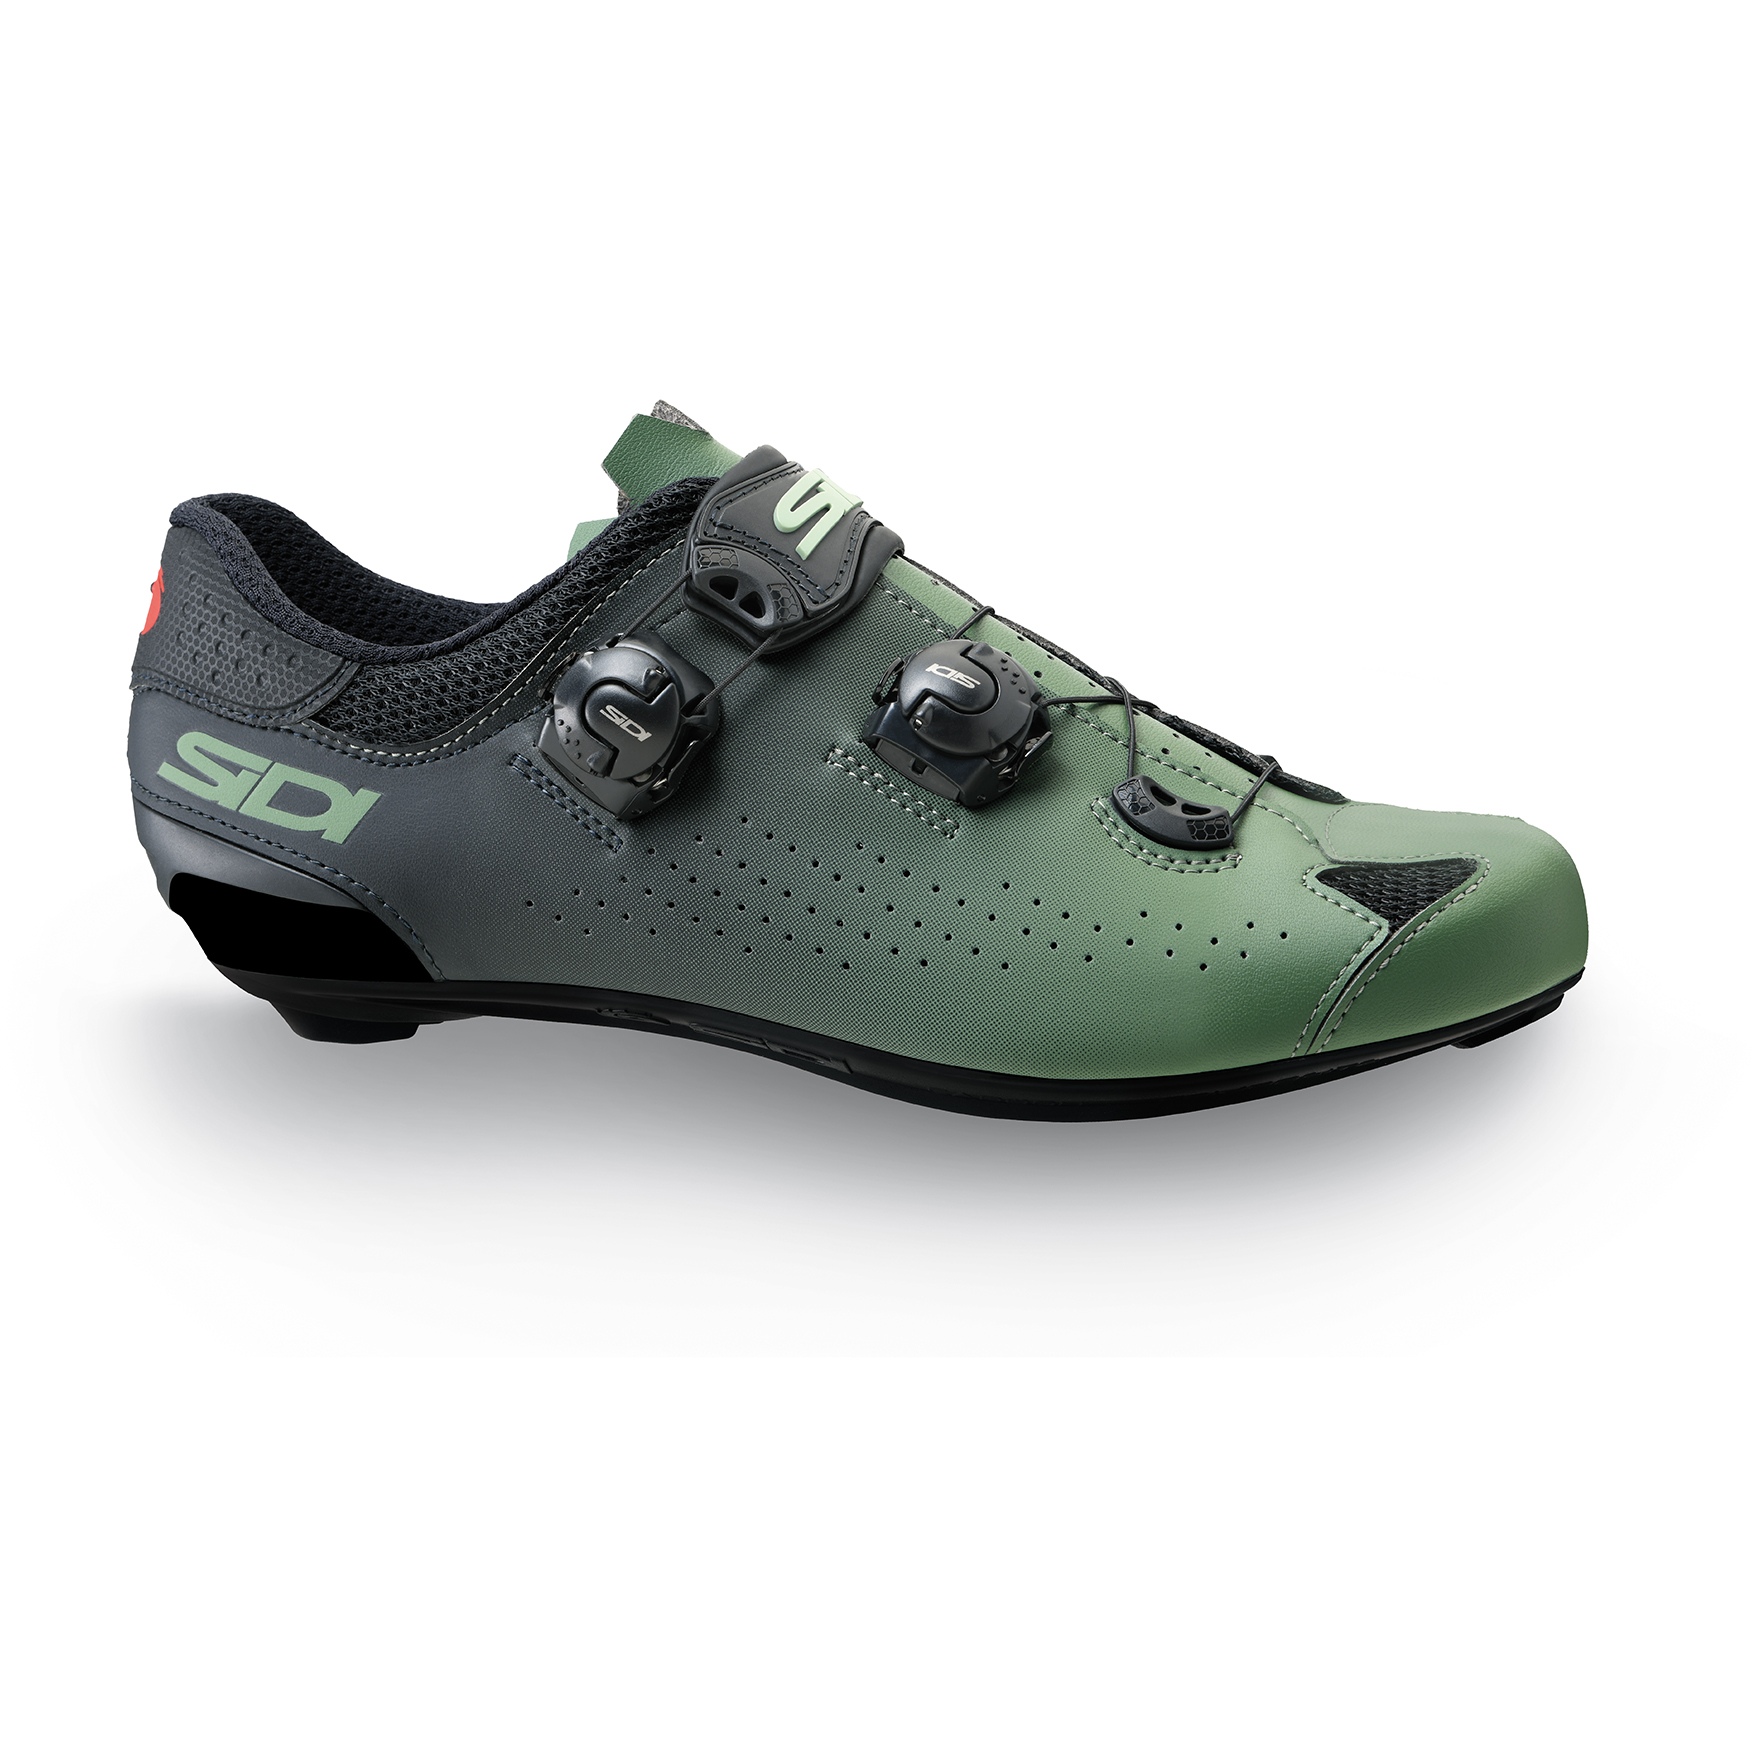 Picture of Sidi Genius 10 Road Shoes - Green/Black